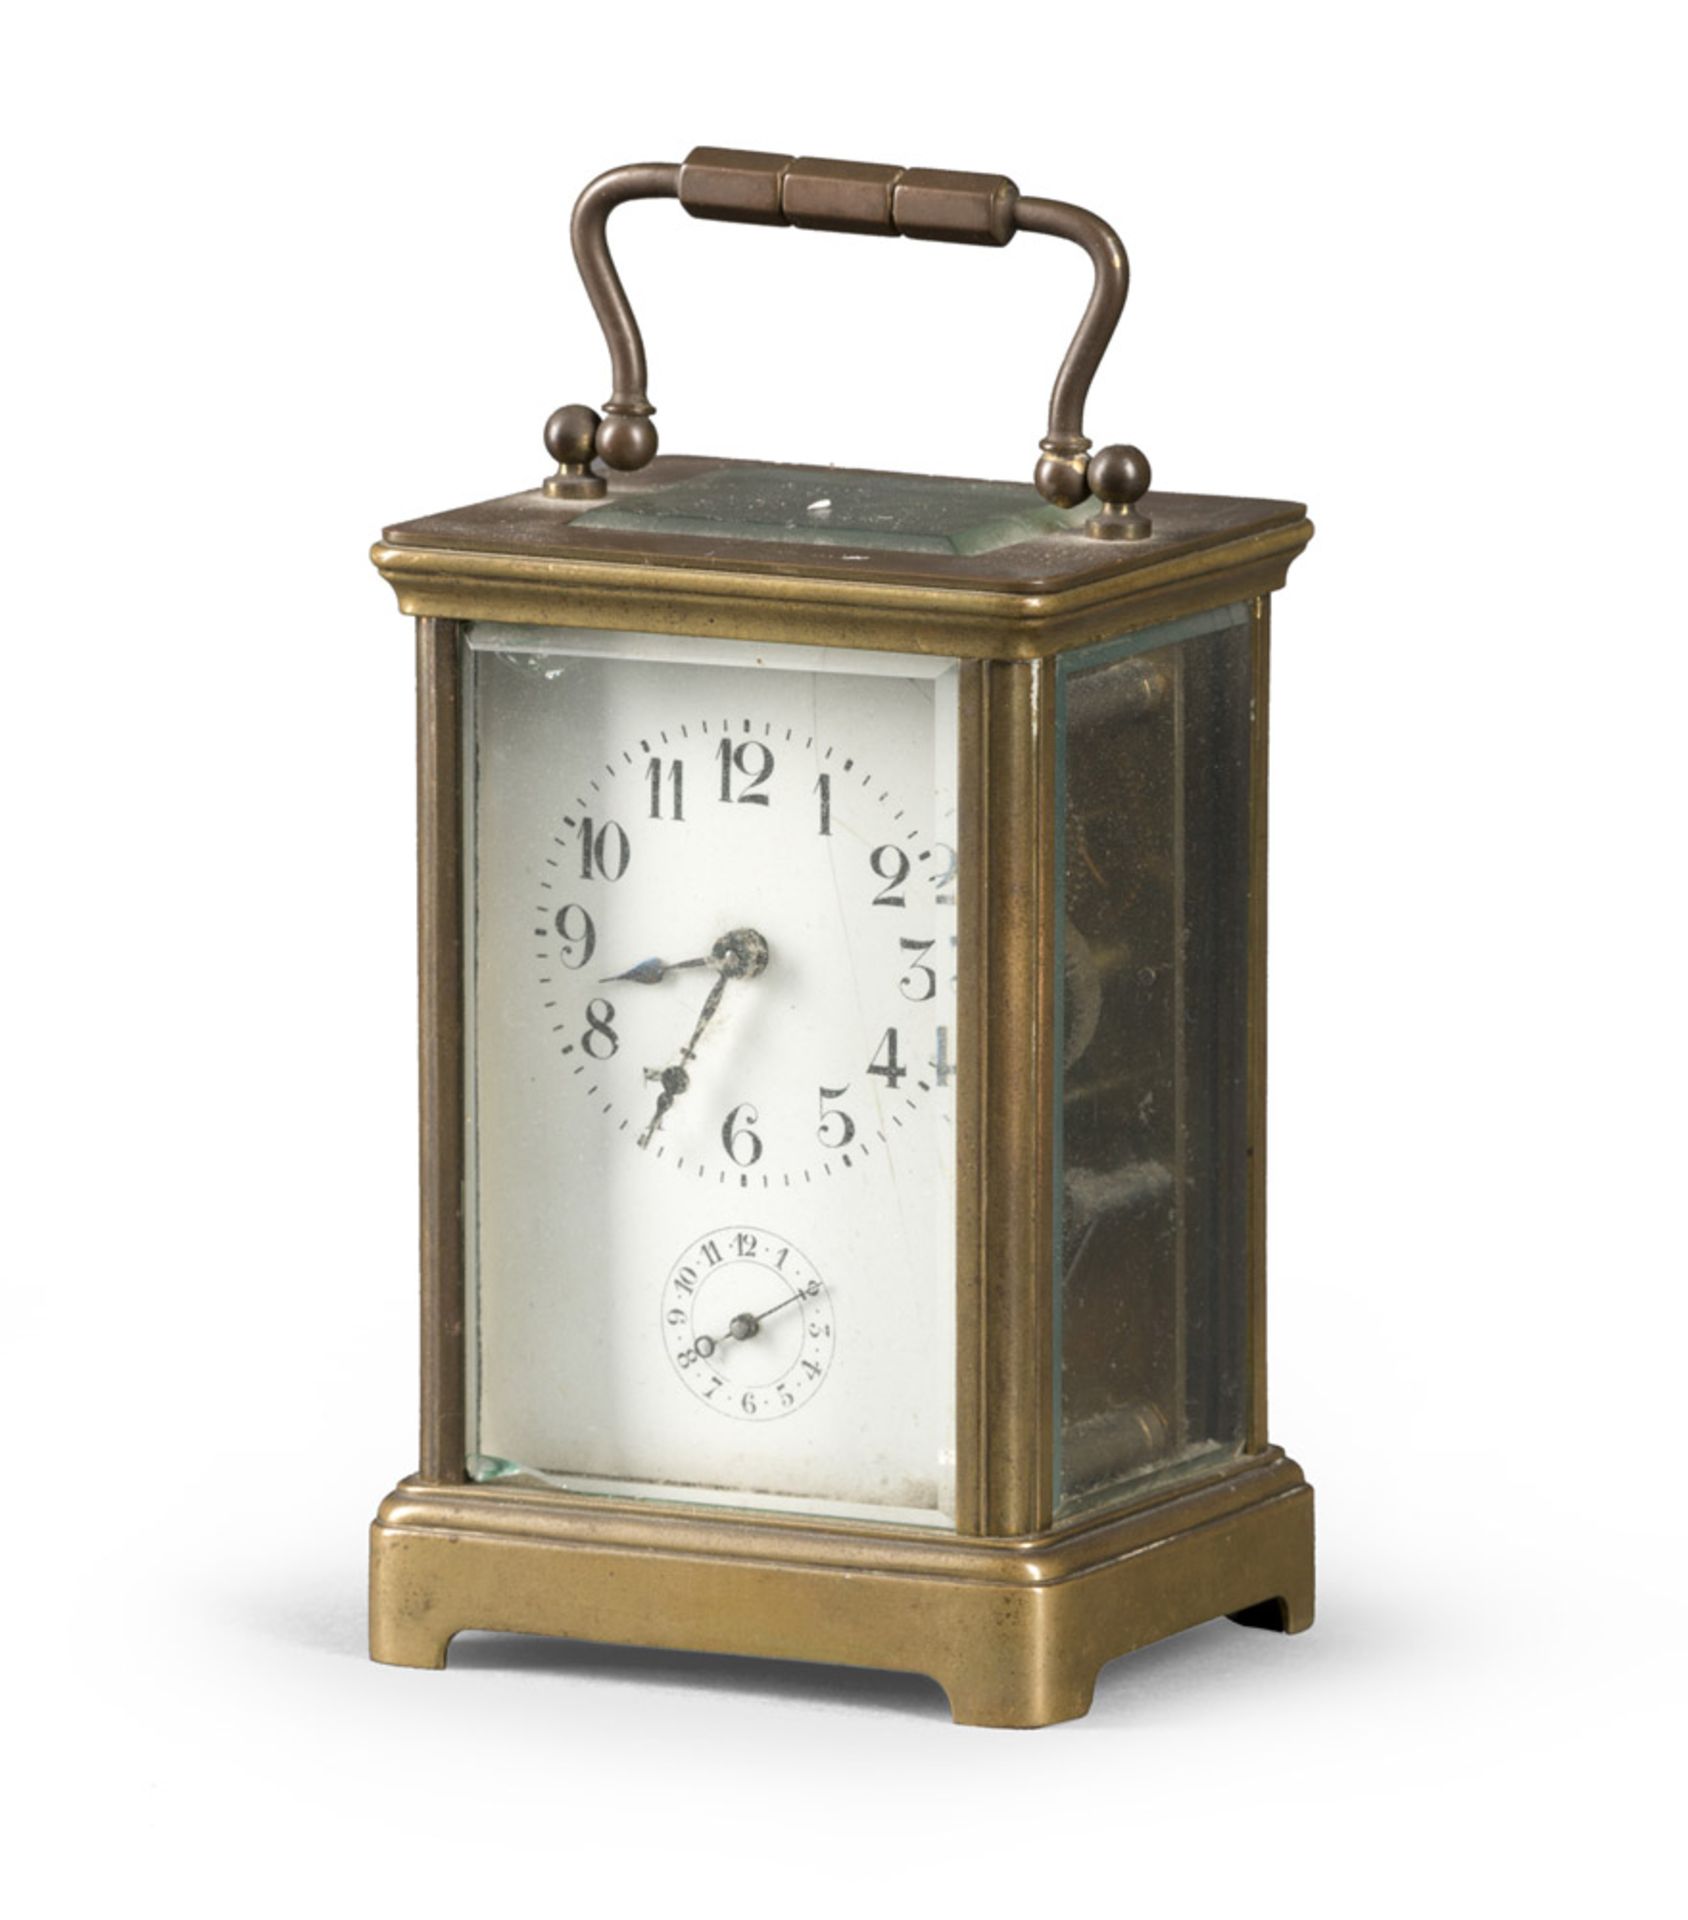 Brass clock with polished glass, early 20th century. Measures cm. 10 x 9 x 7. CAPPUCCINA IN